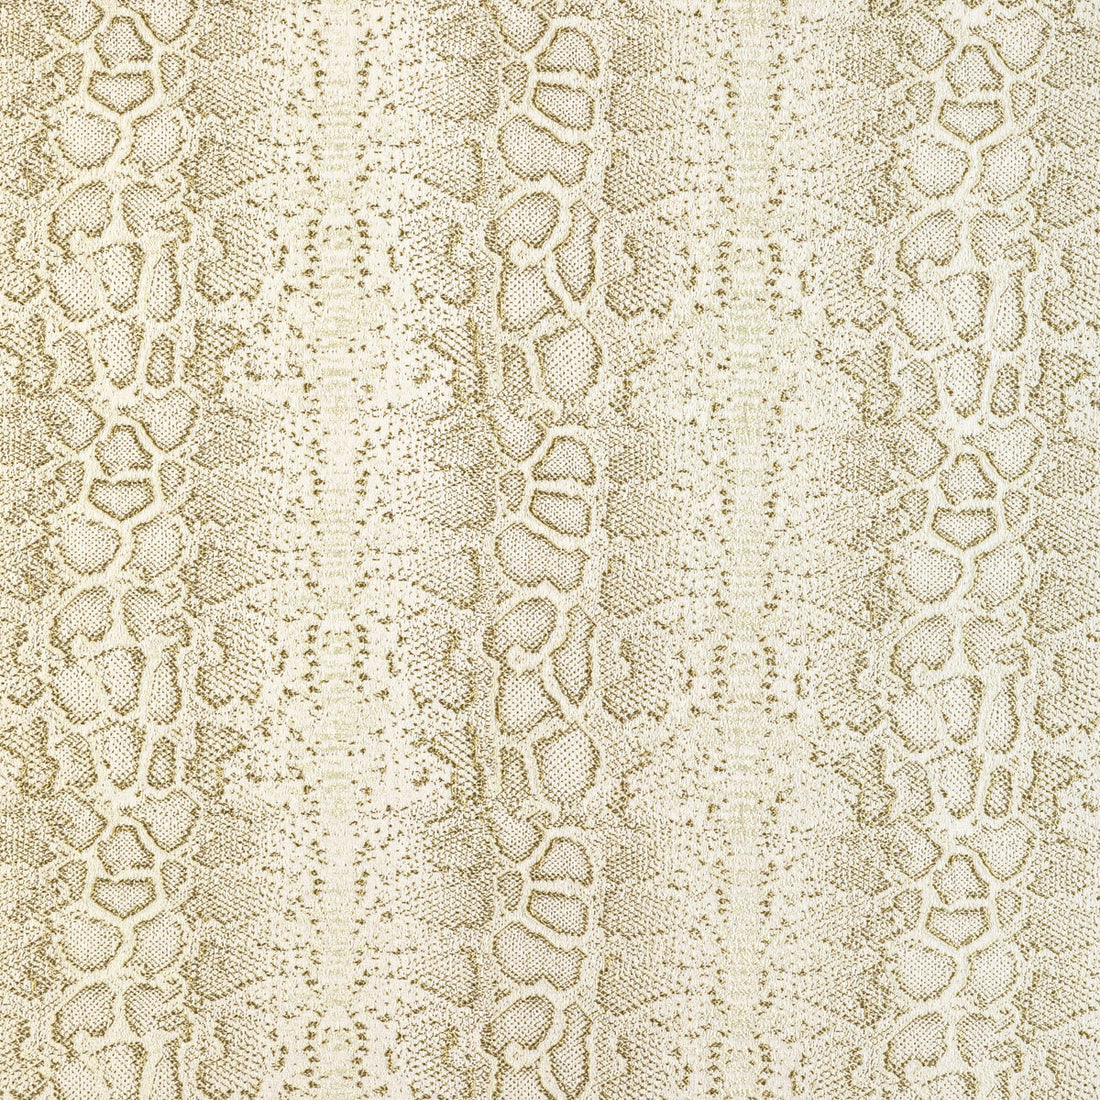 Once Bitten fabric in shimmer color - pattern 36787.116.0 - by Kravet Design in the Candice Olson collection